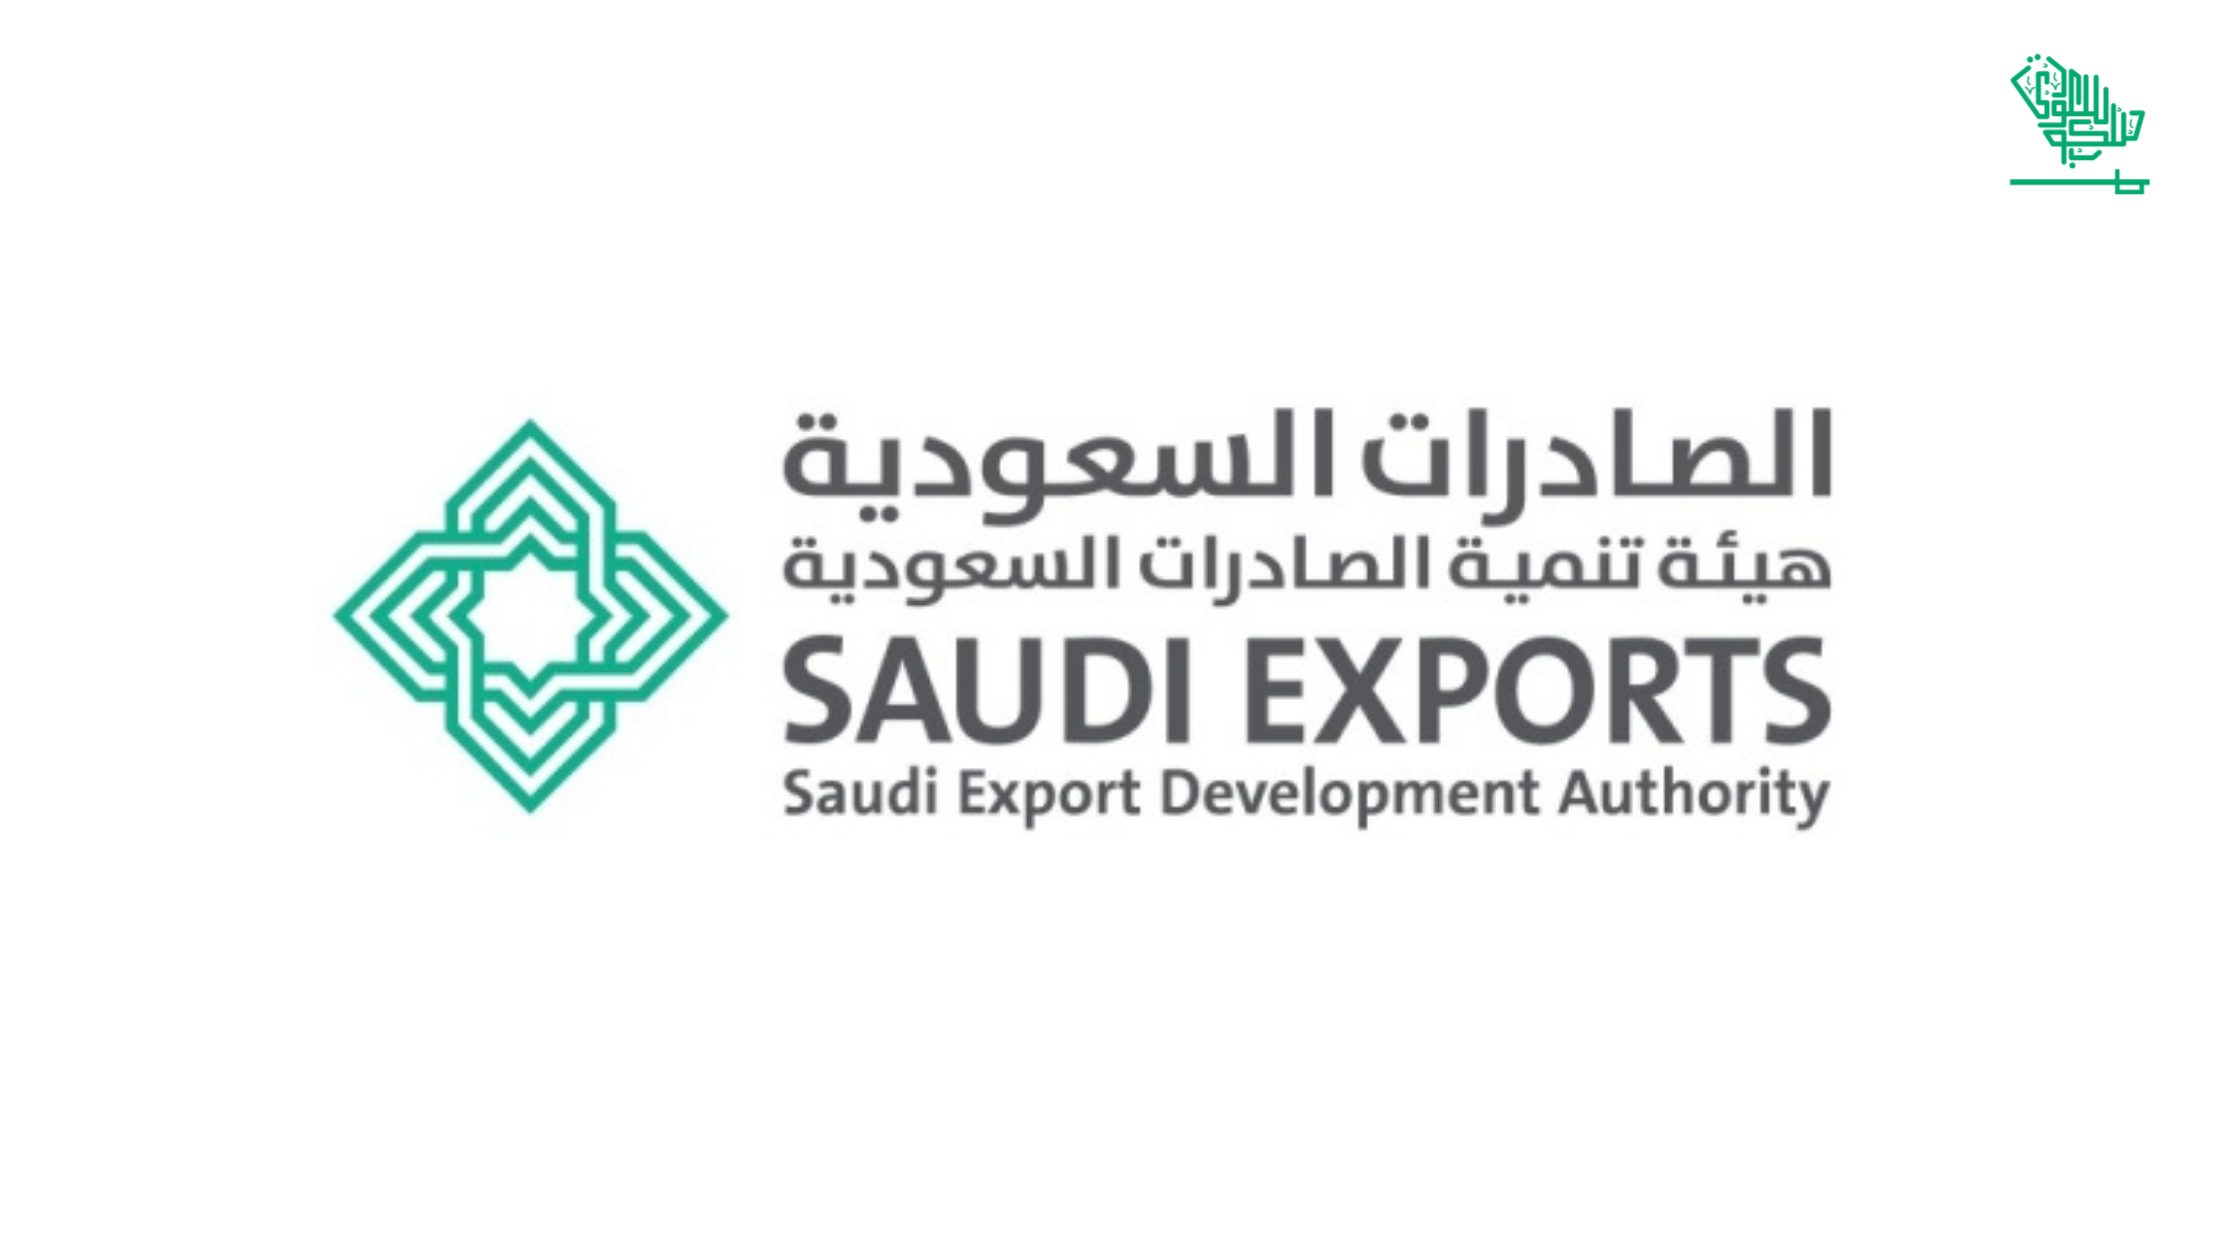 Saudi Exports launches international tendering services to promote national companies.